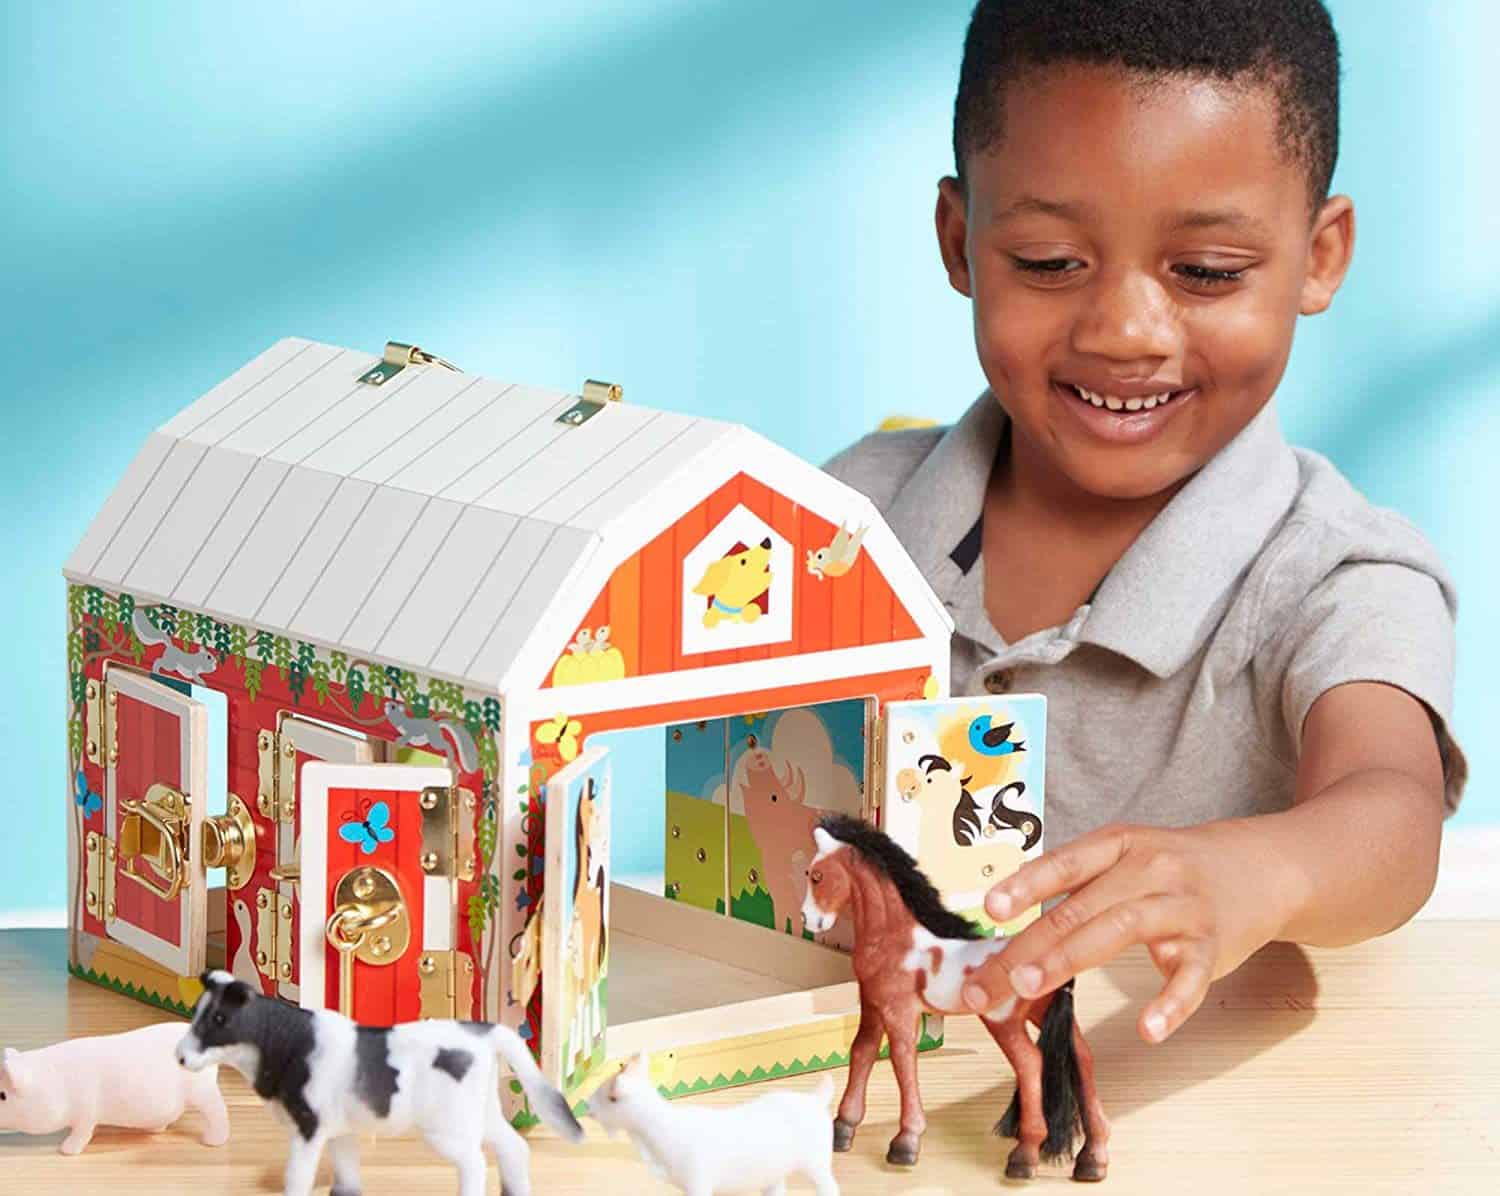 Boy plays with Melissa & Doug's toy farm with animals and doors